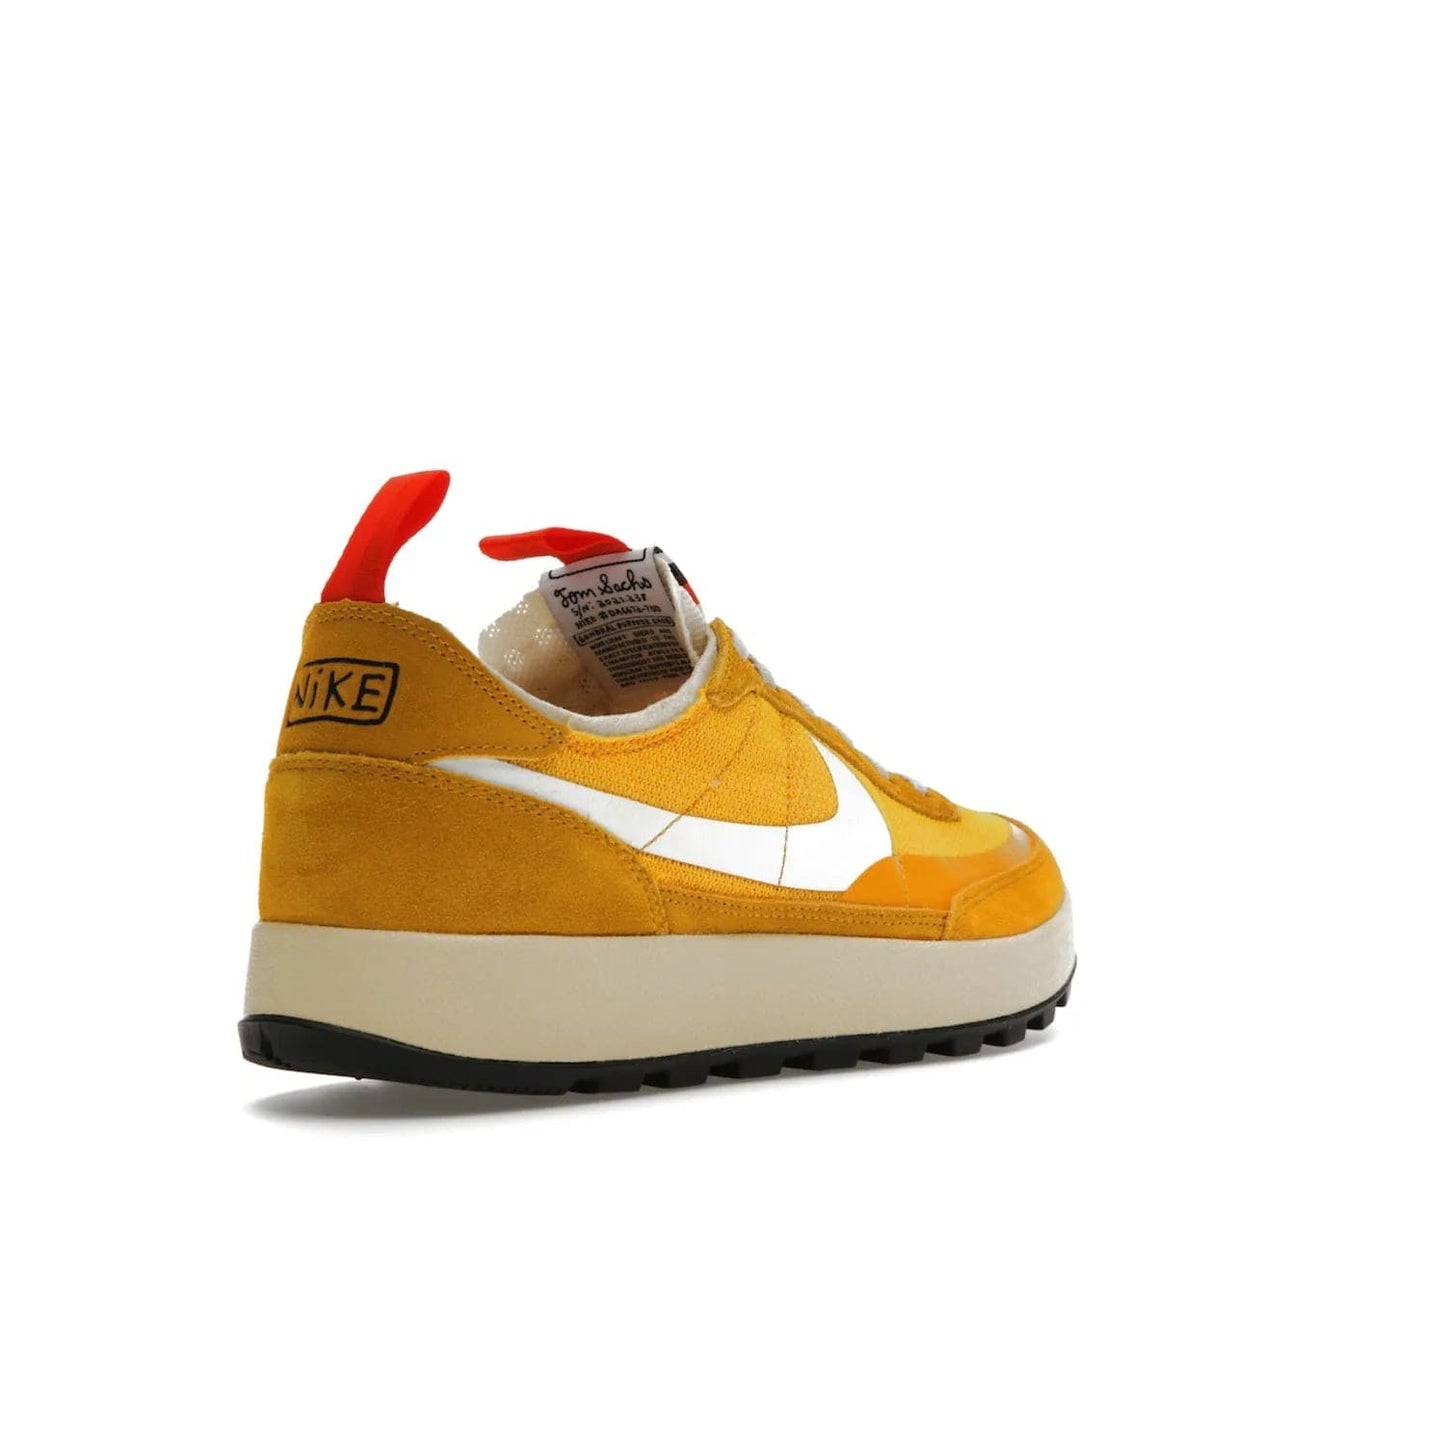 NikeCraft General Purpose Shoe Tom Sachs Archive Dark Sulfur - Image 32 - Only at www.BallersClubKickz.com - Collab between Nike & Tom Sachs. The NikeCraft General Purpose Shoe features dark sulfur mesh upper, suede overlays, contrasting white Swoosh and orange tabs. EVA cushioning & black waffle-traction rubber outsole ensures performance. Stylish & perfect for any occasion, the shoe released September 2, 2022.